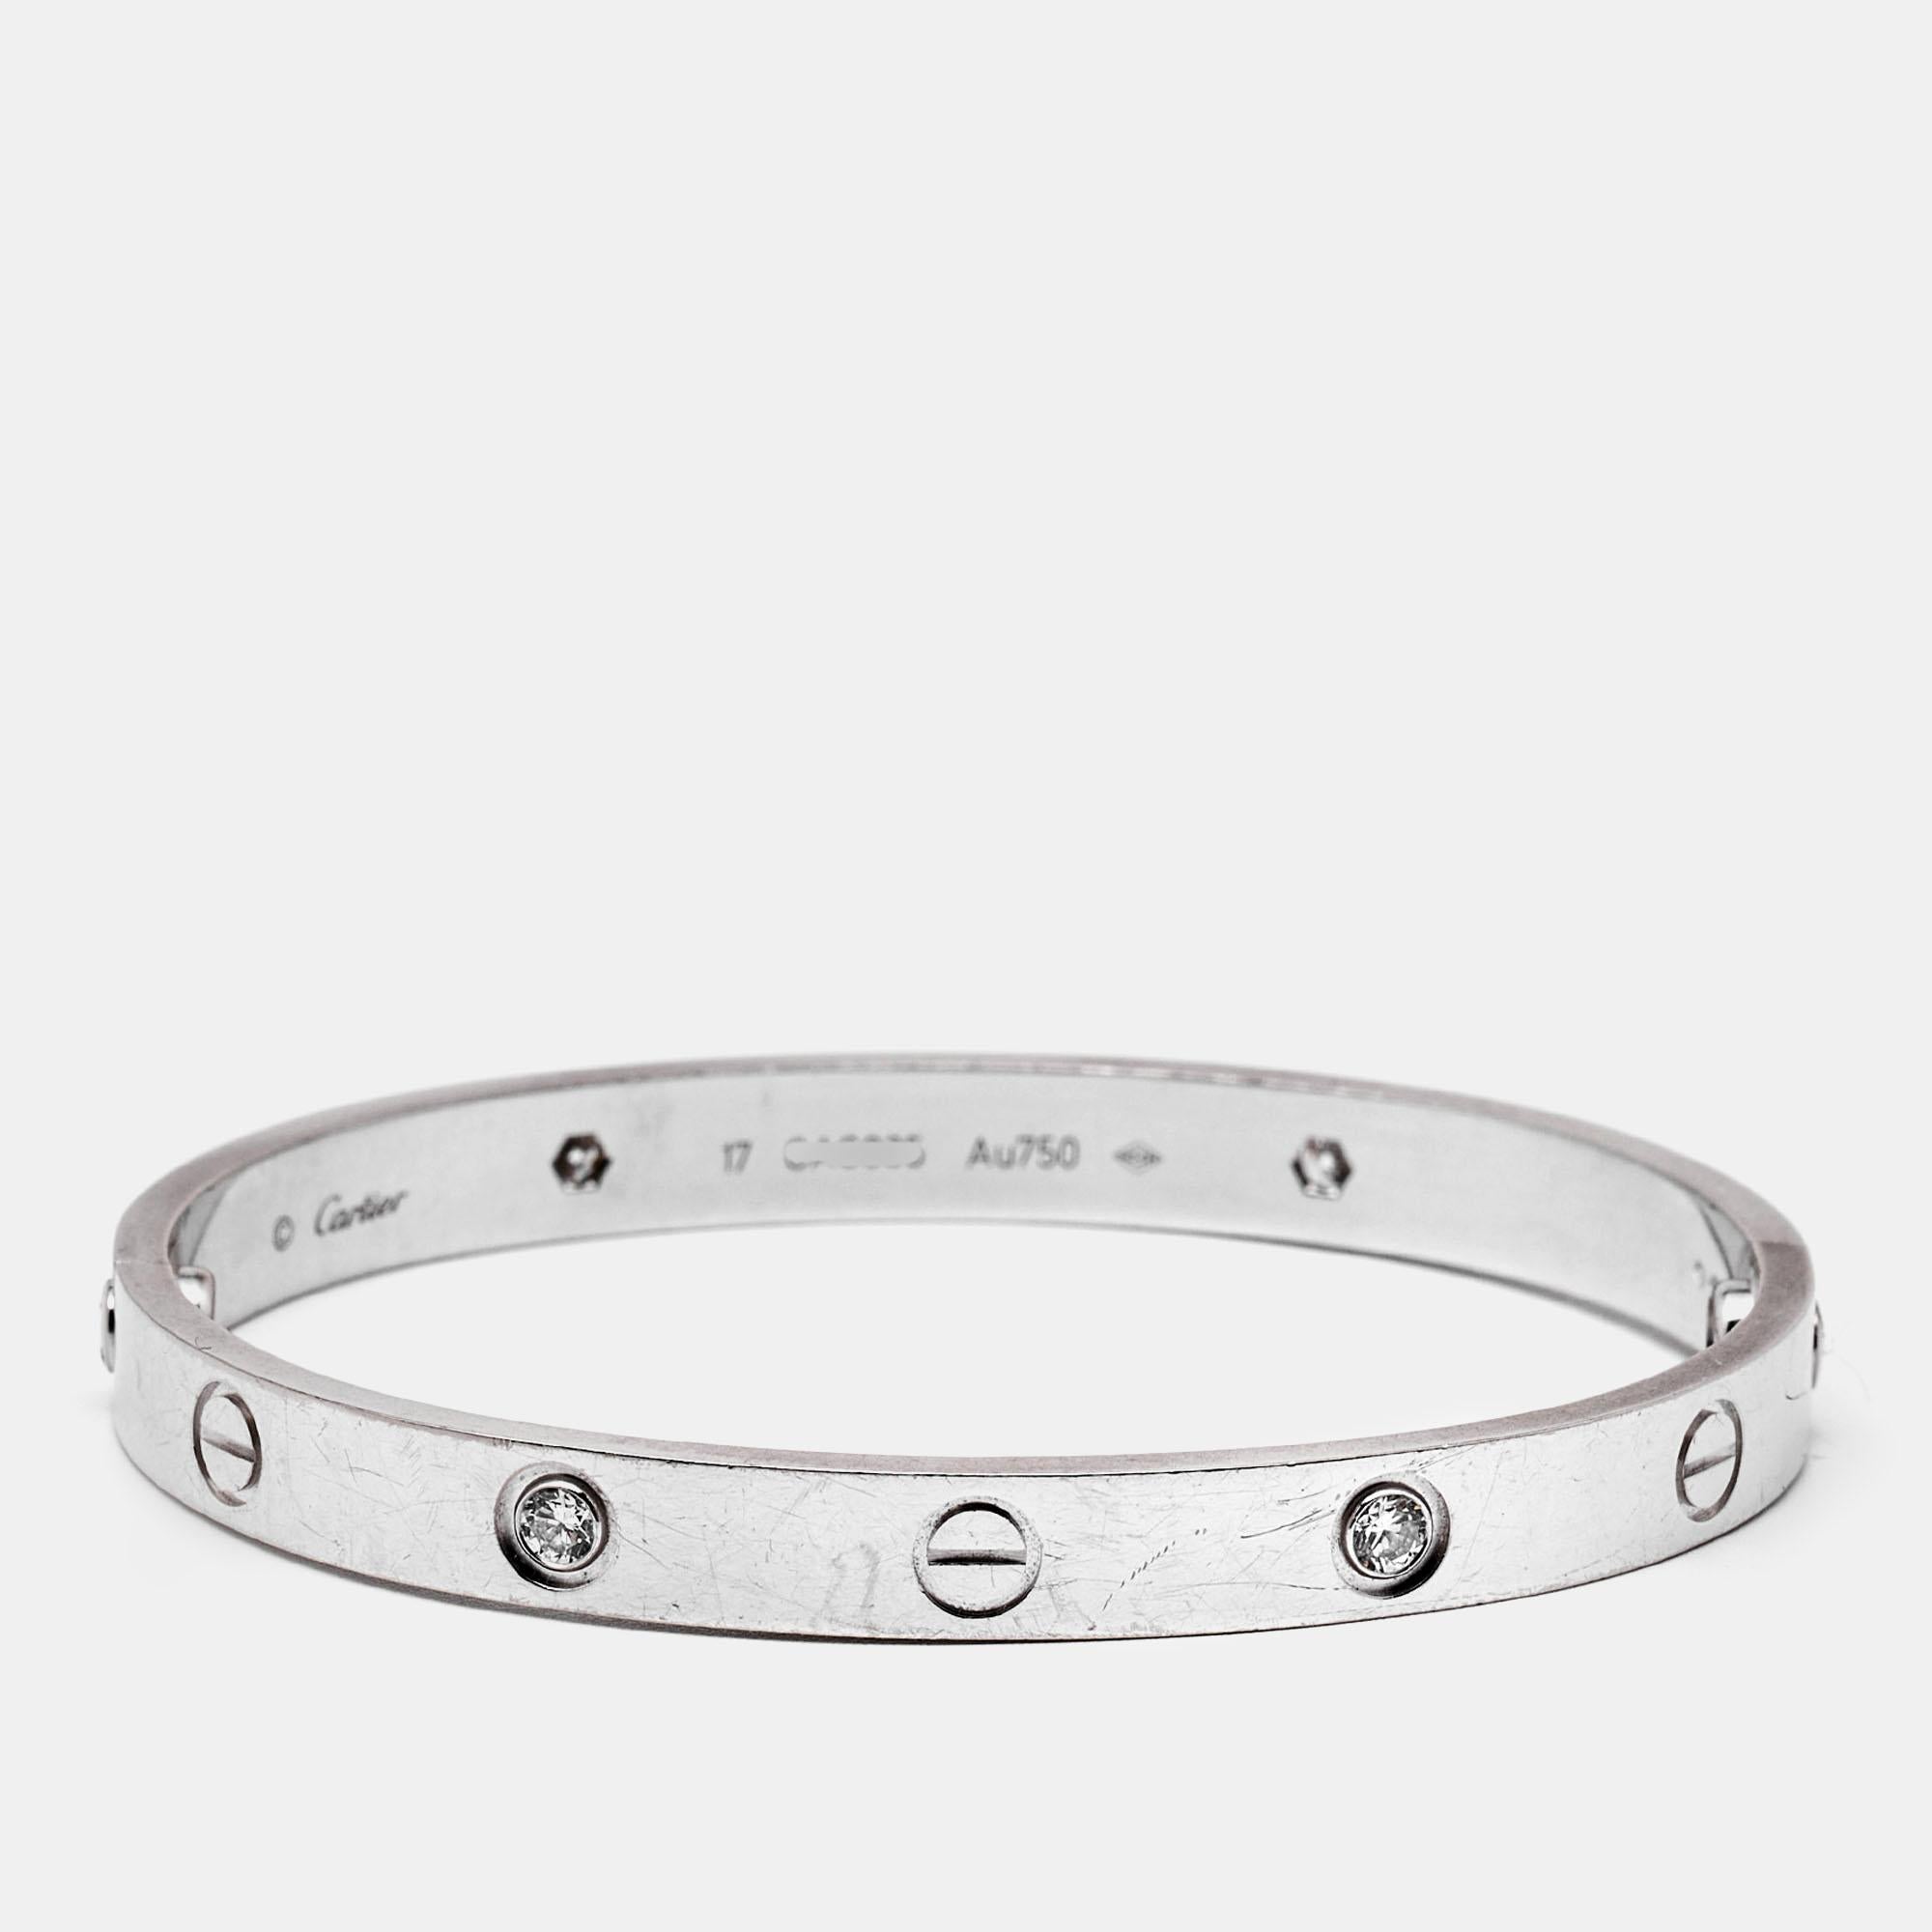 Cartier's Love bracelet is a modern symbol of luxury and a way to lock in one's love. Designed in an oval shape to comfortably sit around your wrist, the iconic piece is laid with distinct screw motifs and secured by a screw closure. This beauty